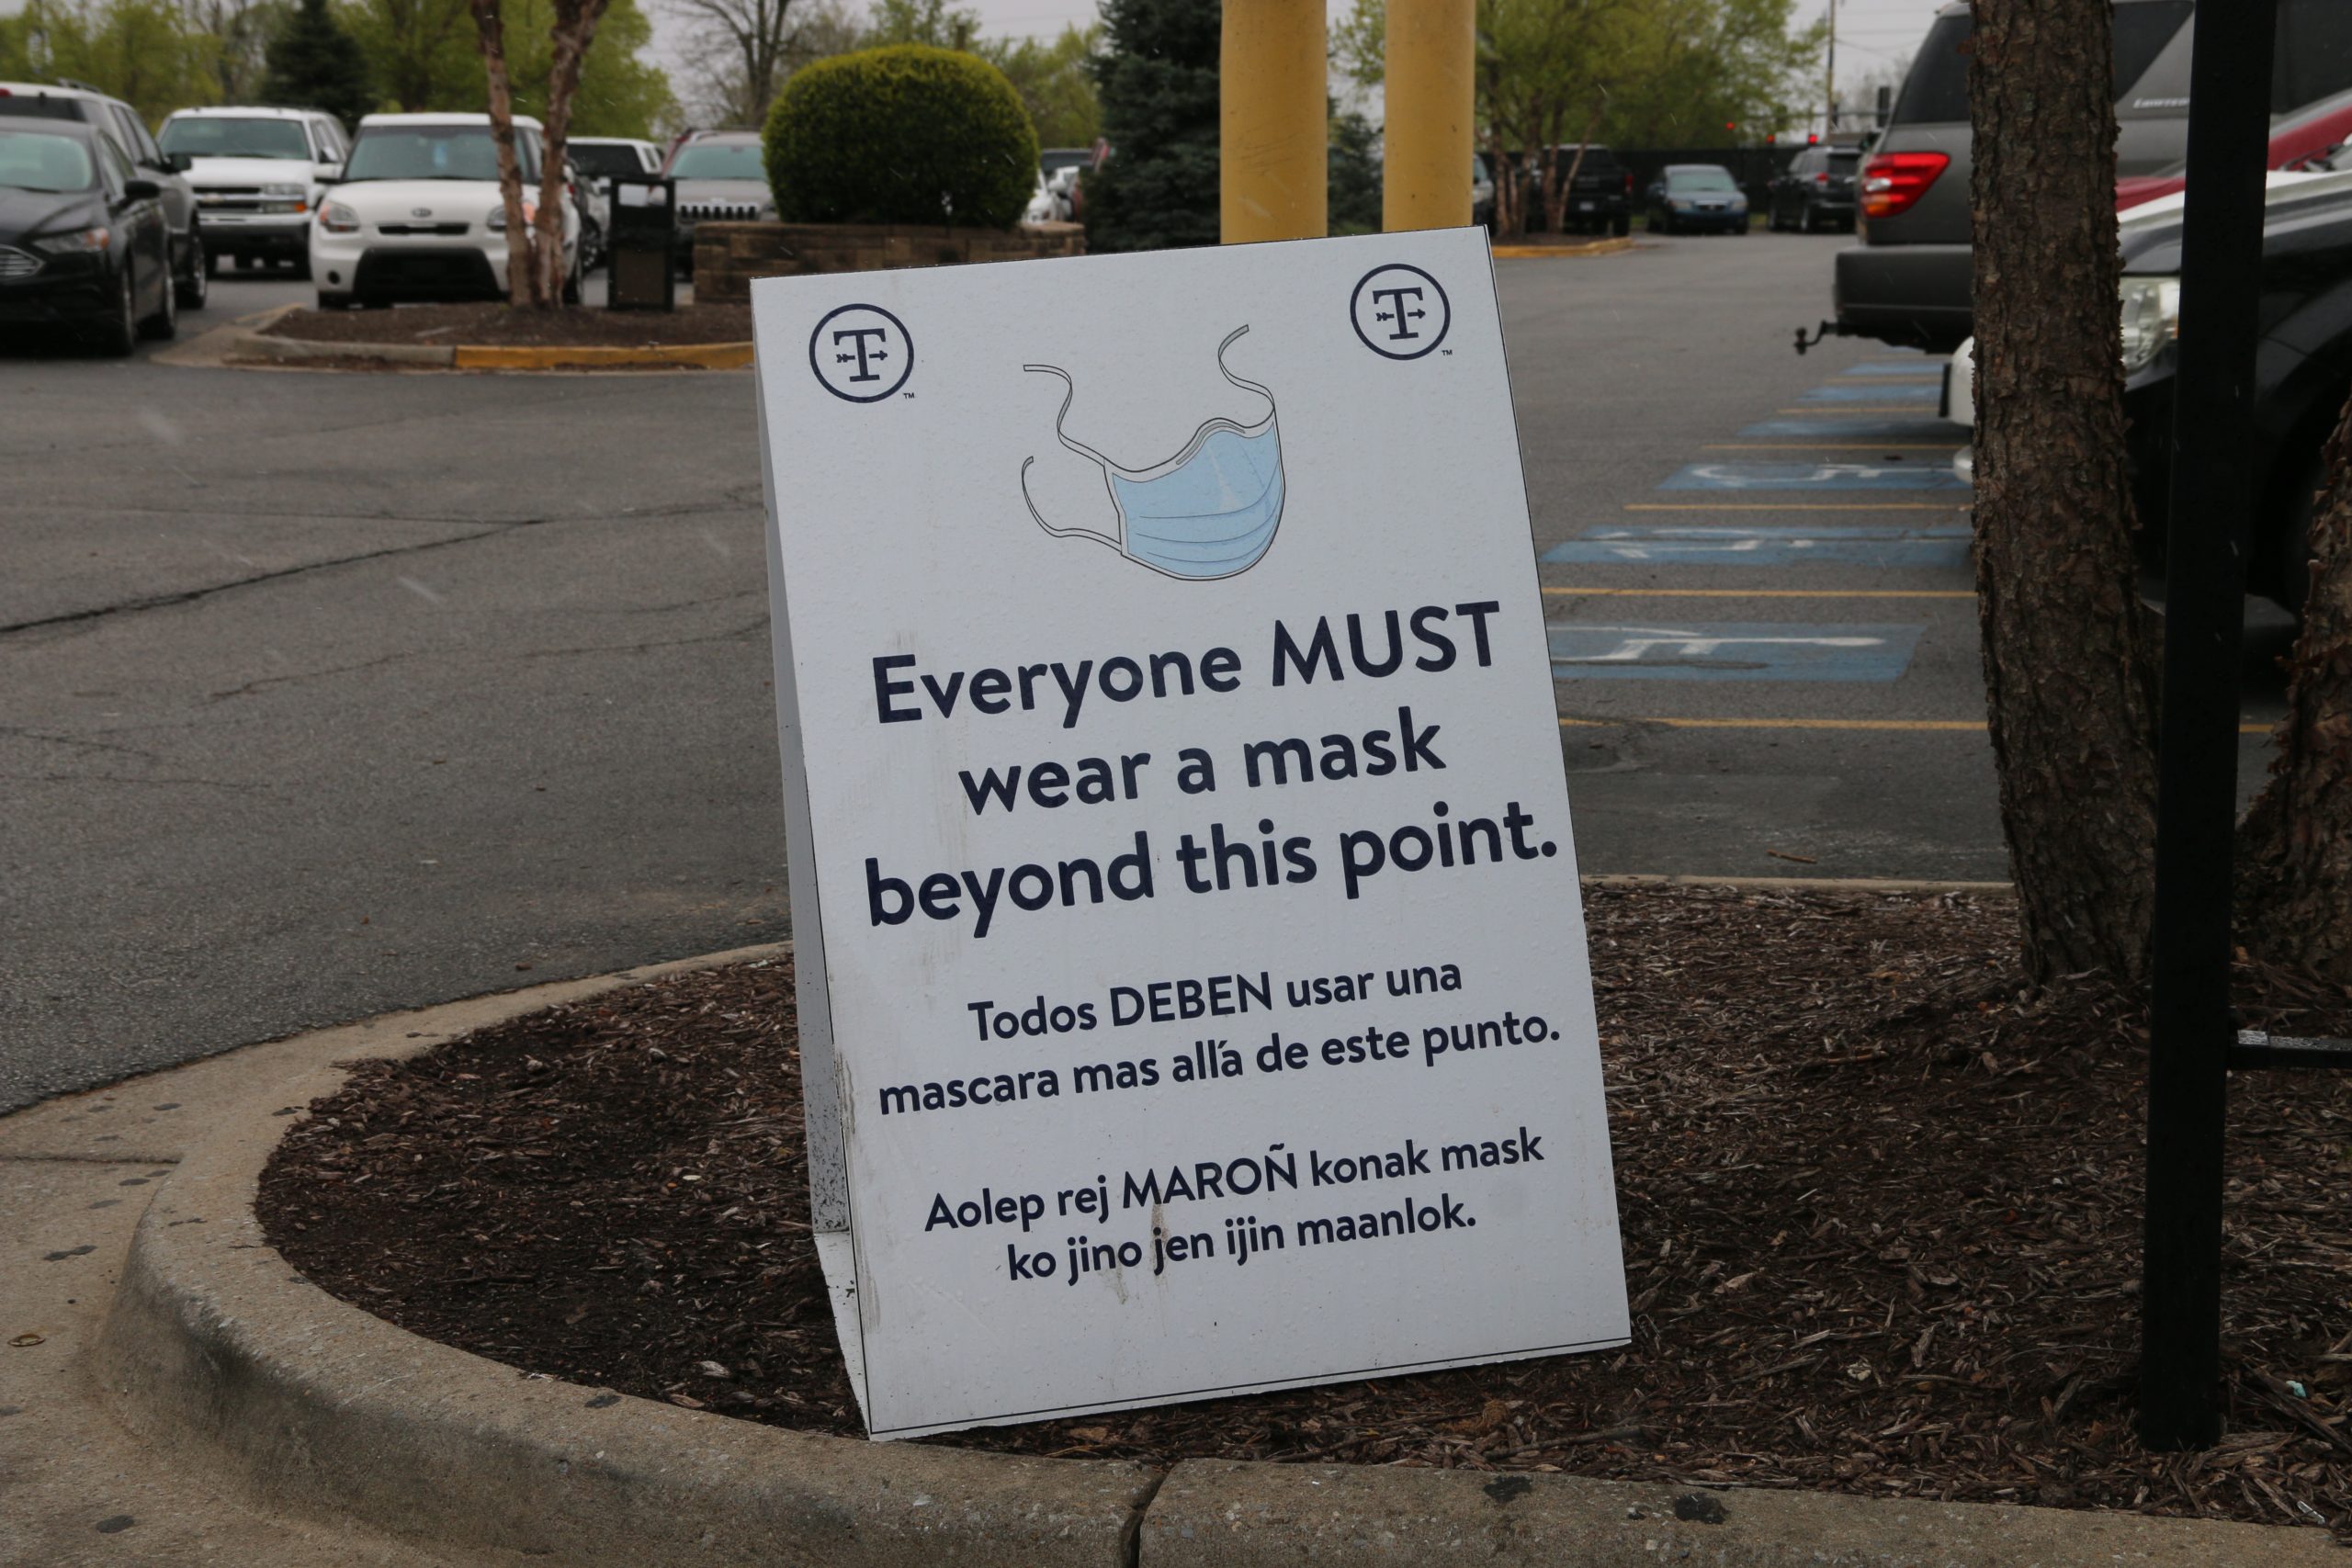 Outside of the Tyson Berry Street plant in Springdale, Arkansas, a sign in English, Spanish, and Marshallese stands reminding employees to wear a mask before entering the location, April 20, 2021. Tyson currently provides surgical-style face masks to its employees. (Photo by Abby Zimmardi)